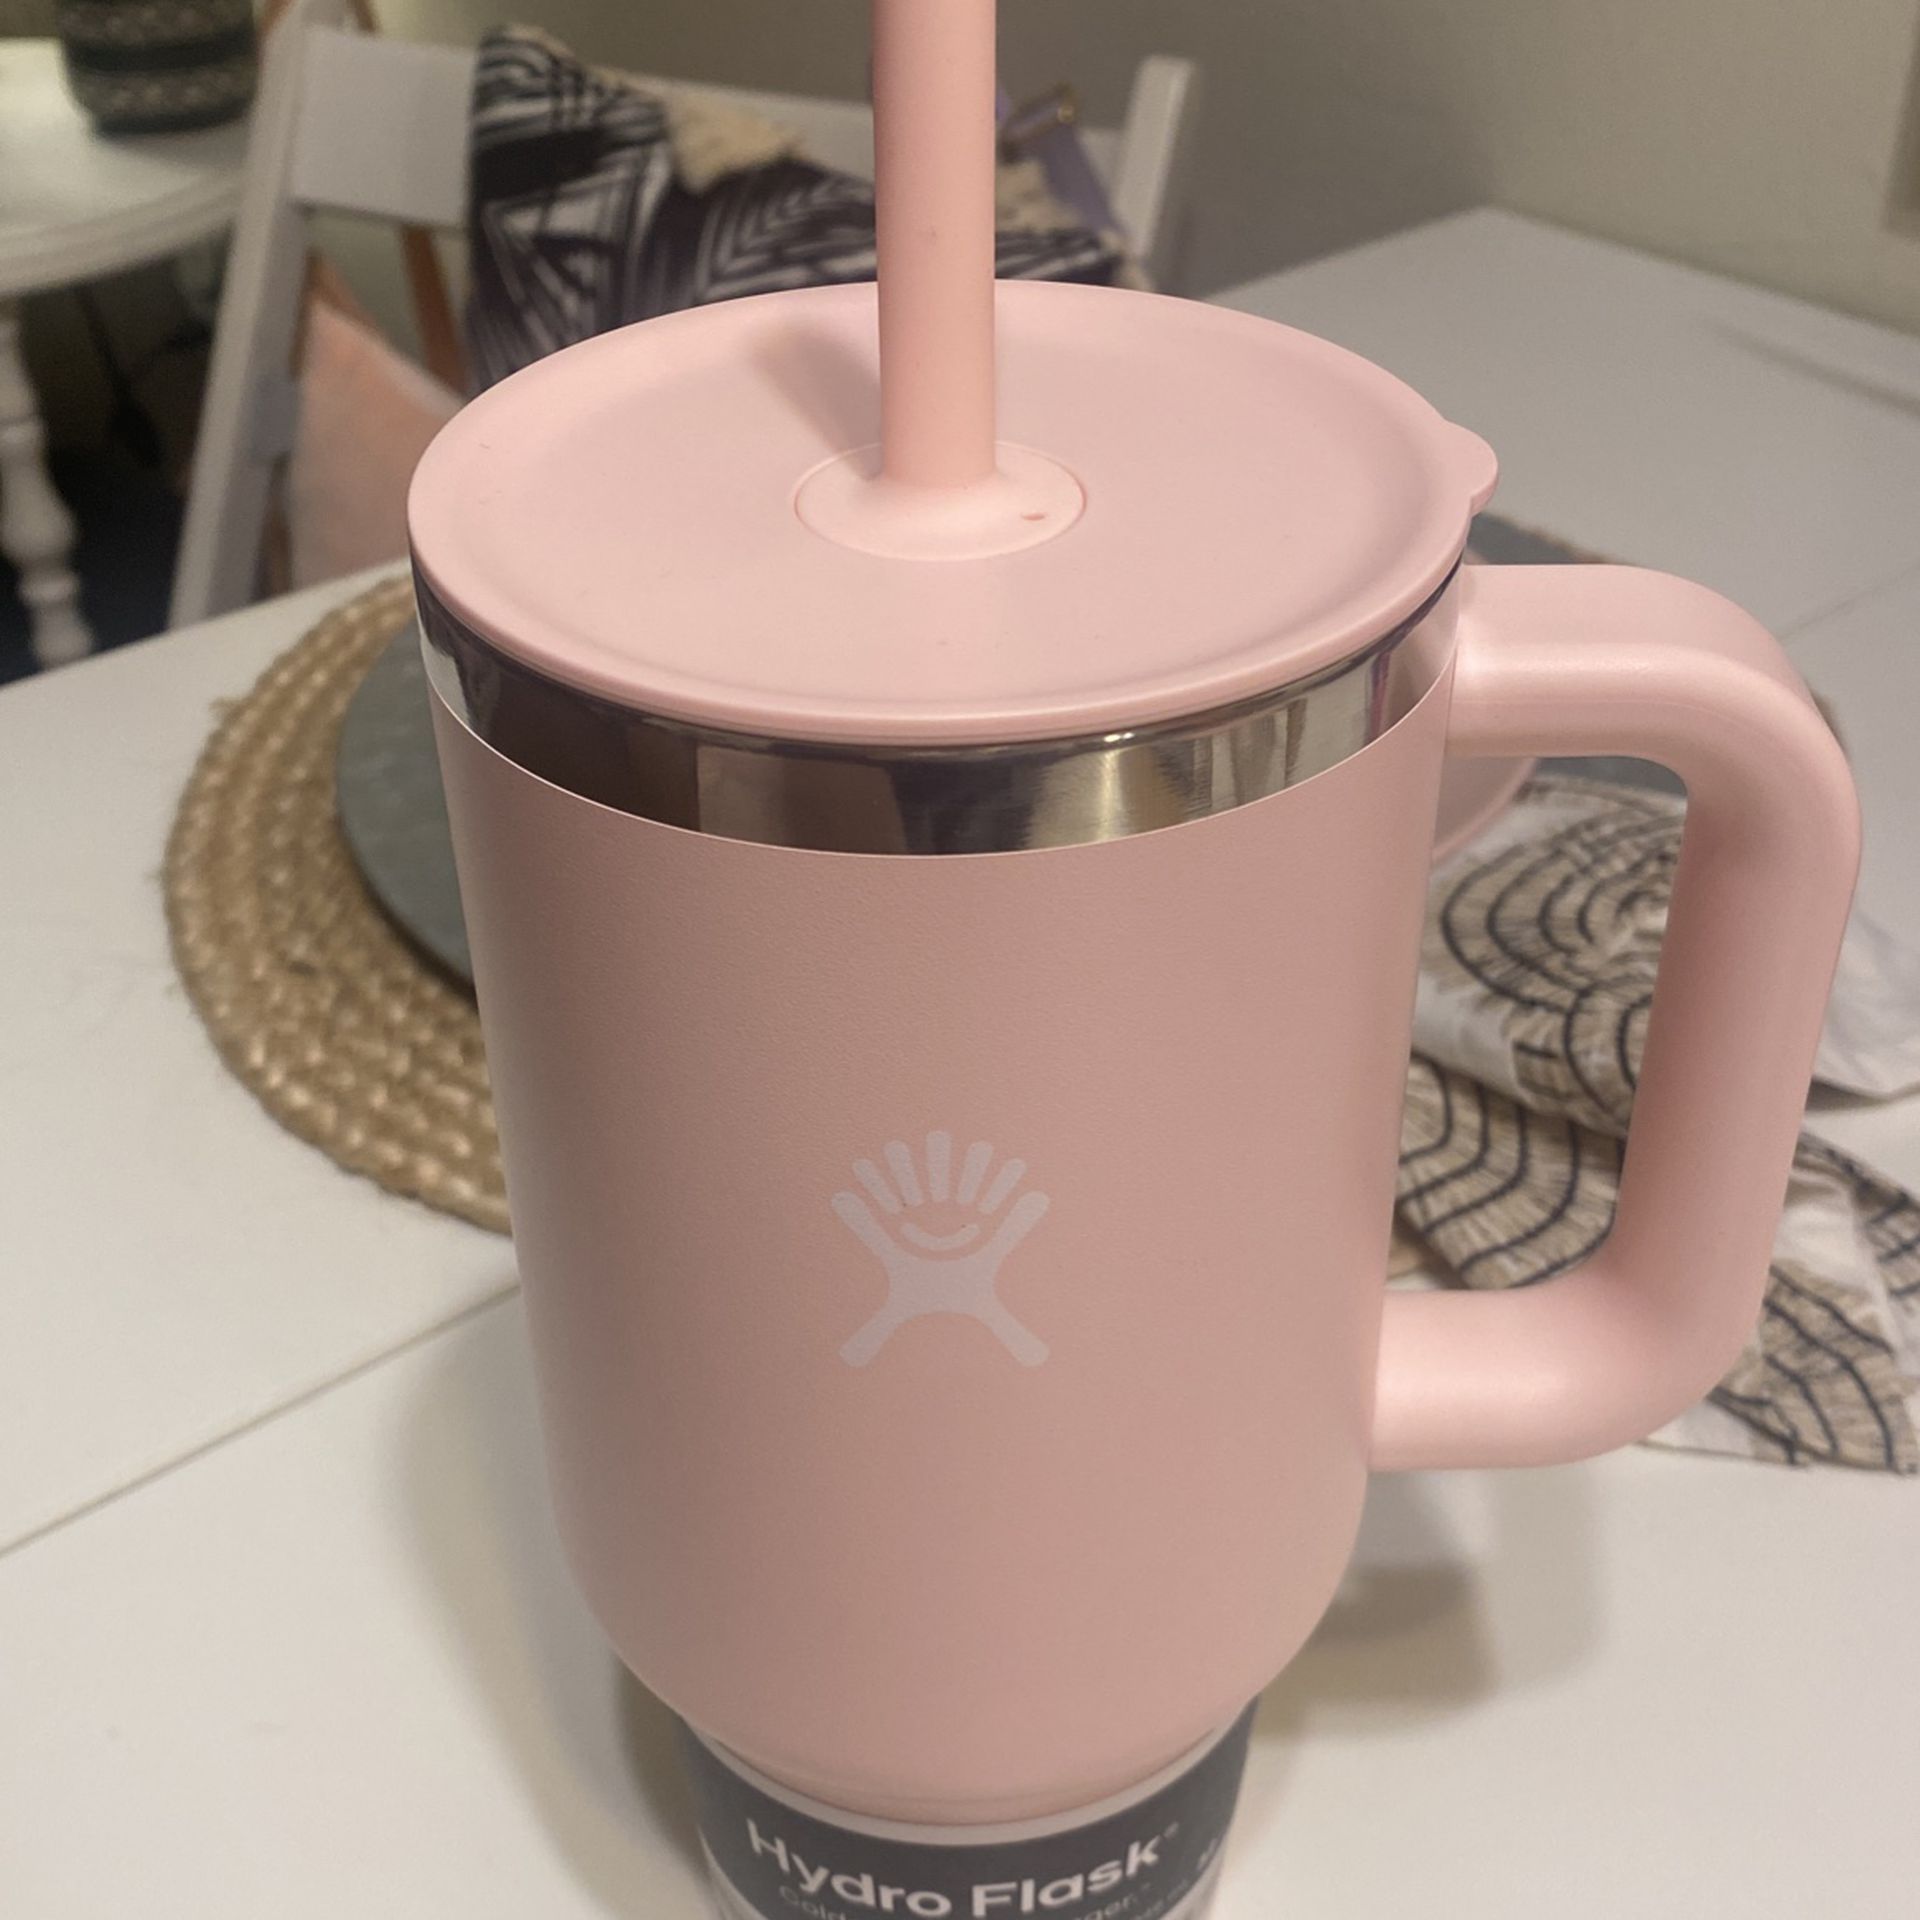 40 Oz Pink HydroFlask With Strawlid for Sale in La Verne, CA - OfferUp